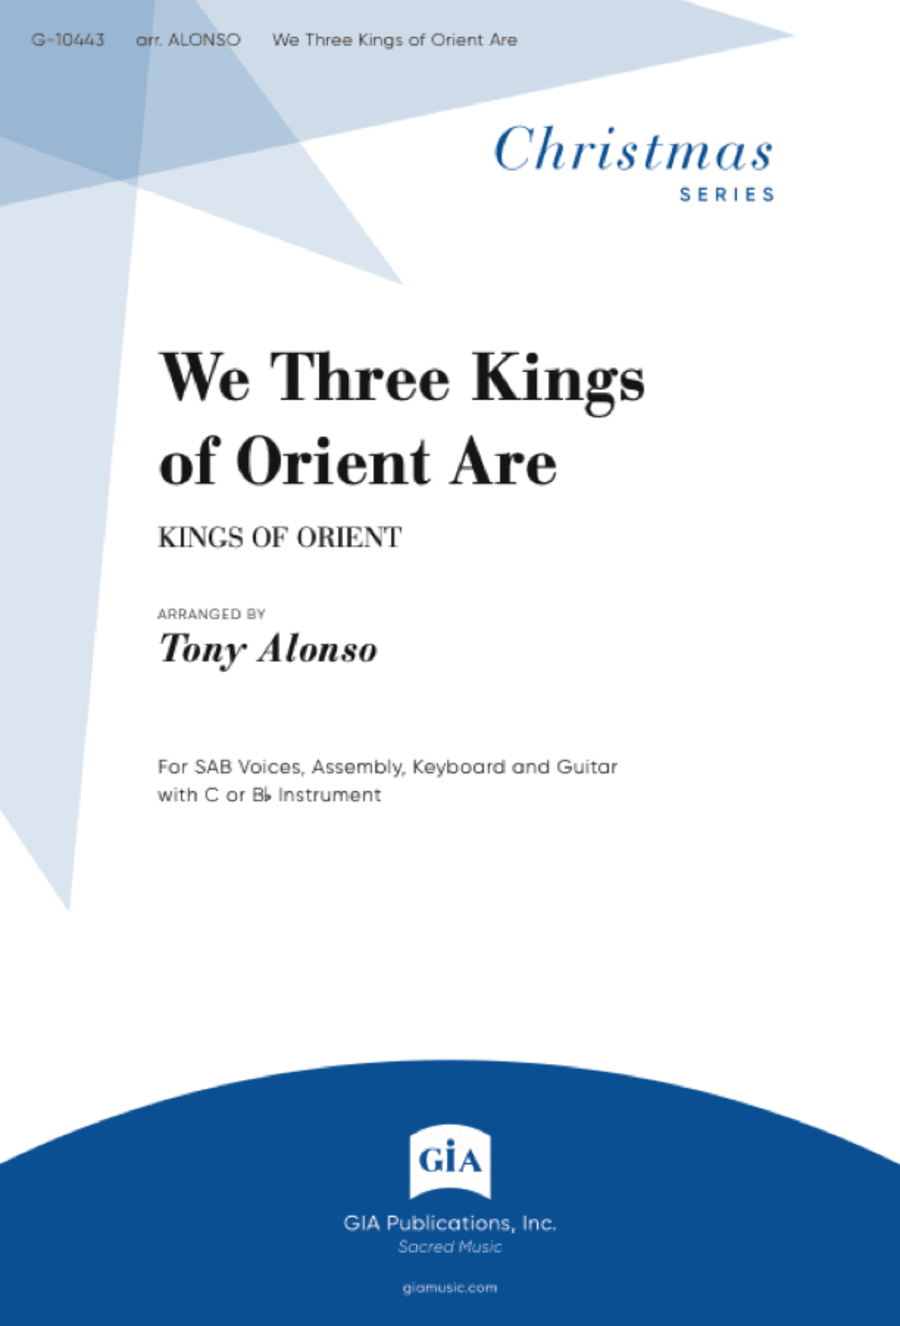 We Three Kings of Orient Are - Guitar edition